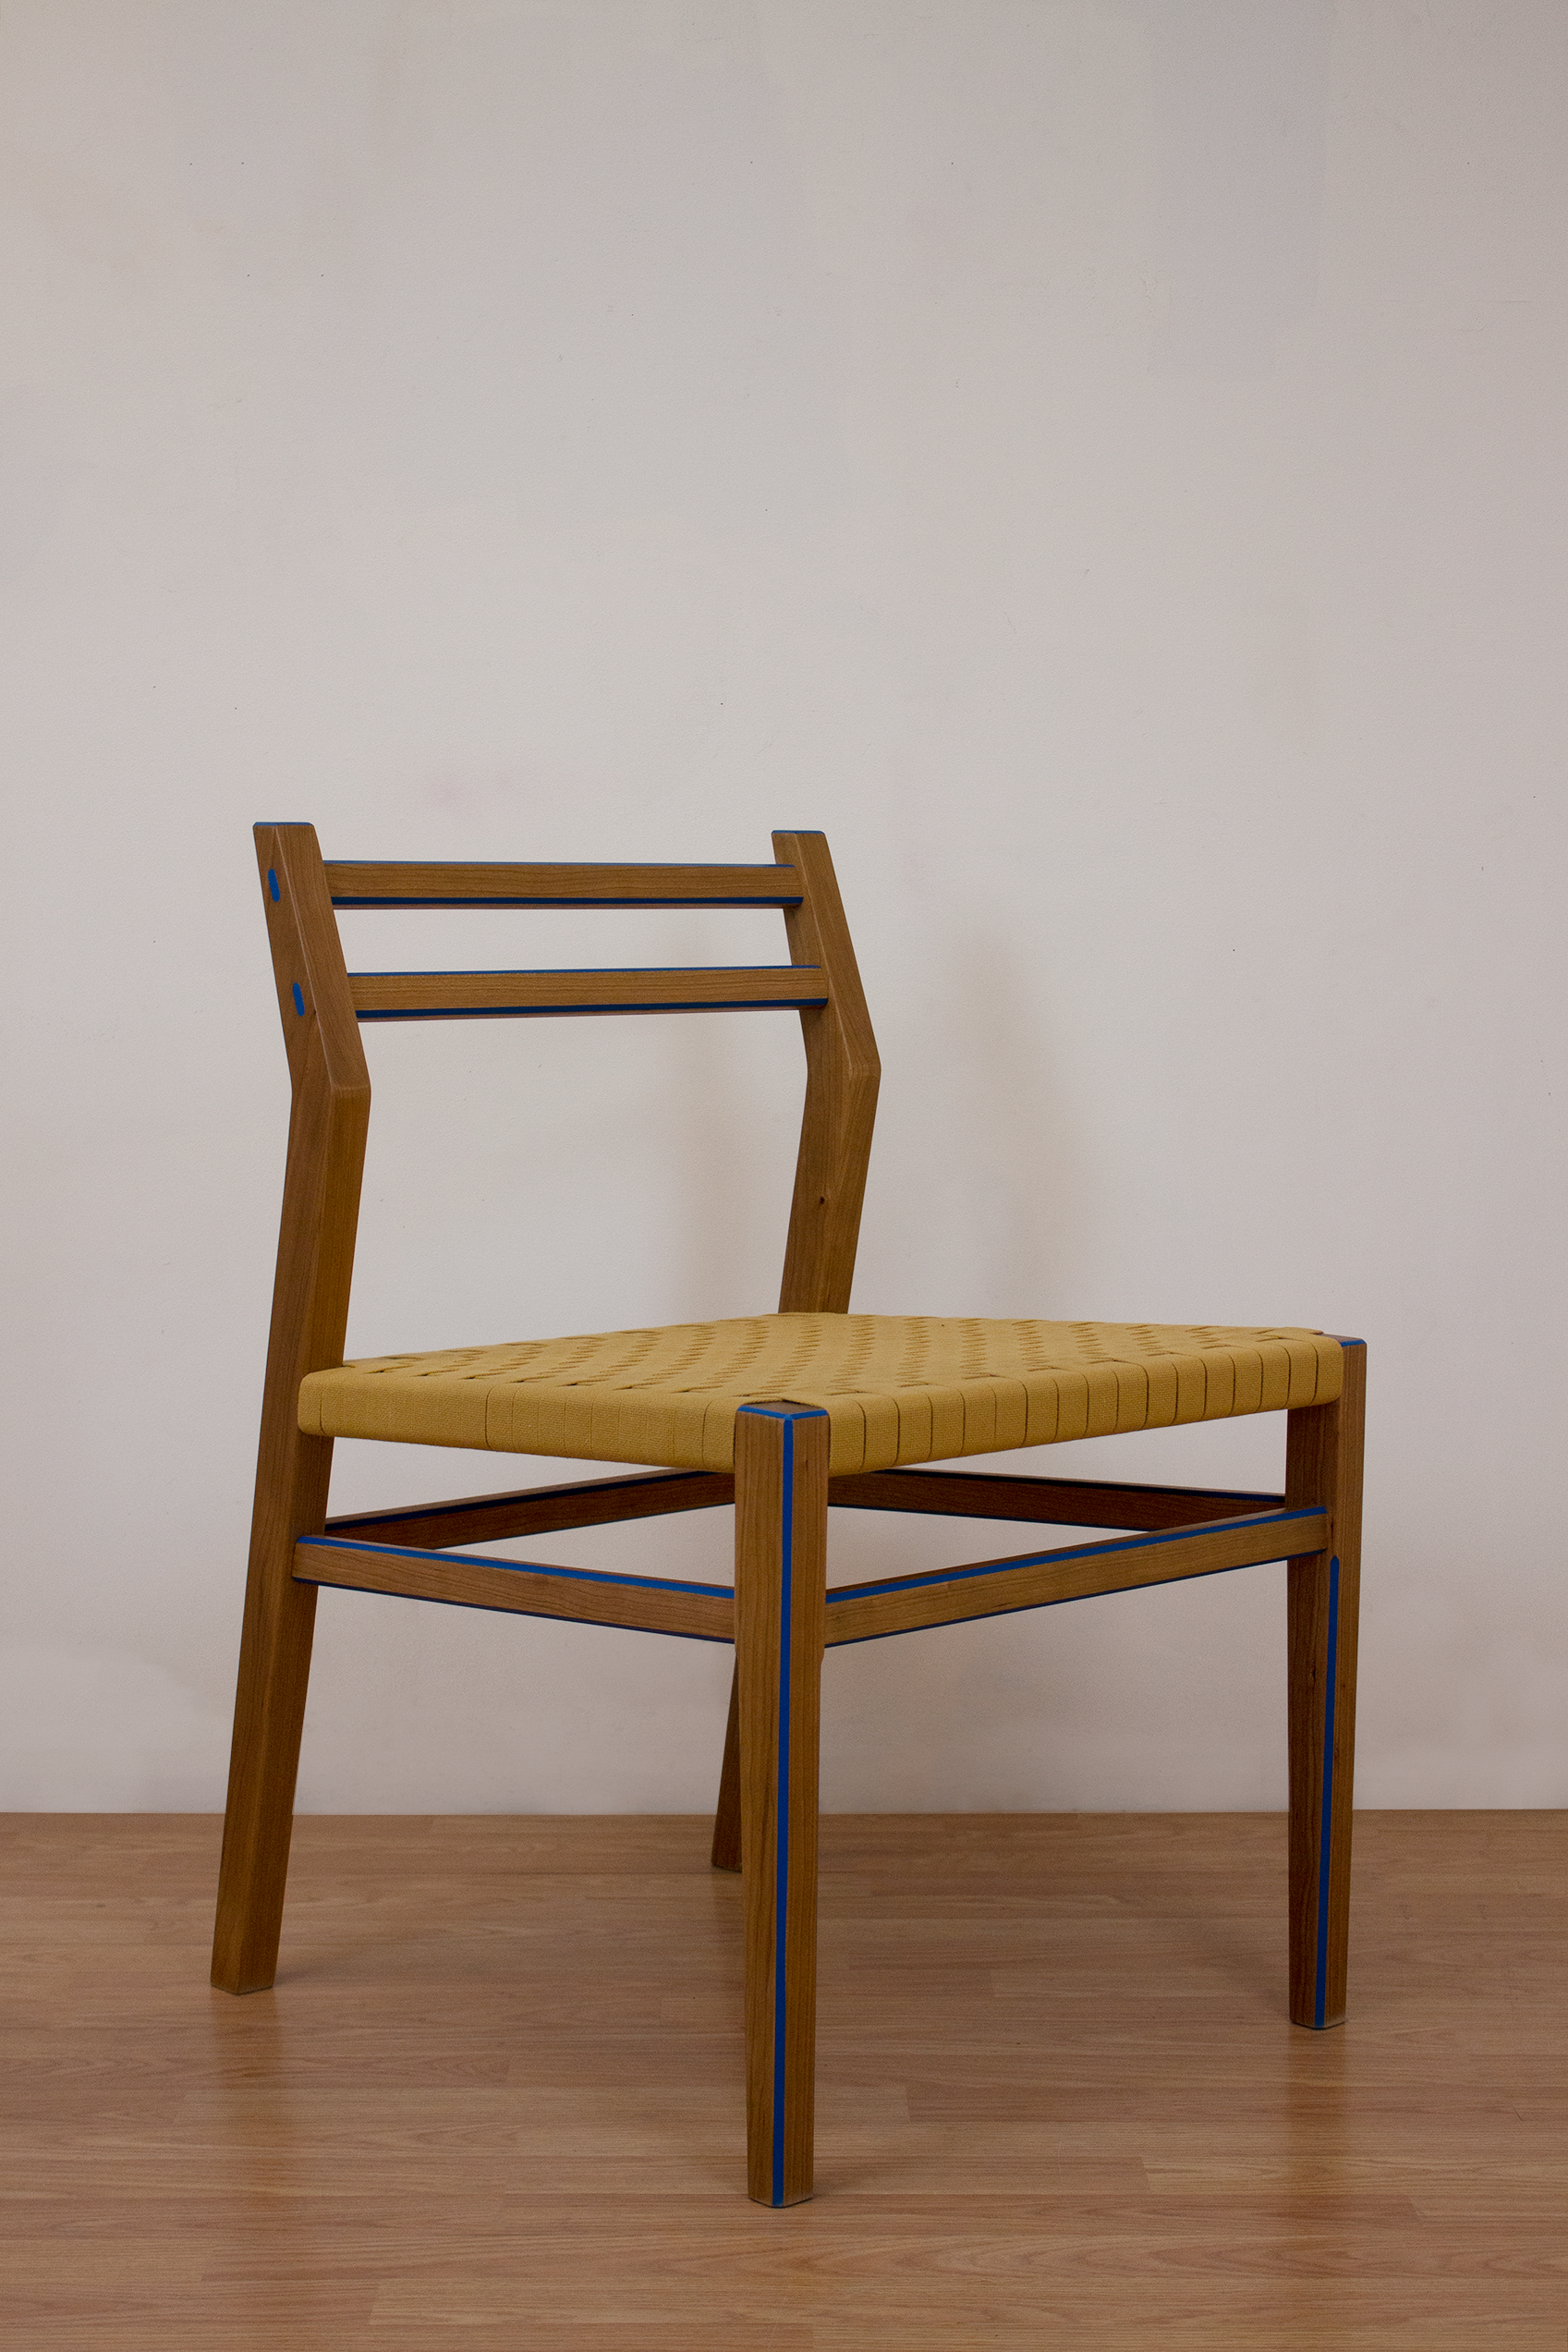 Side Cherry chair with woven Shaker tape seat and blue highlights on the edges